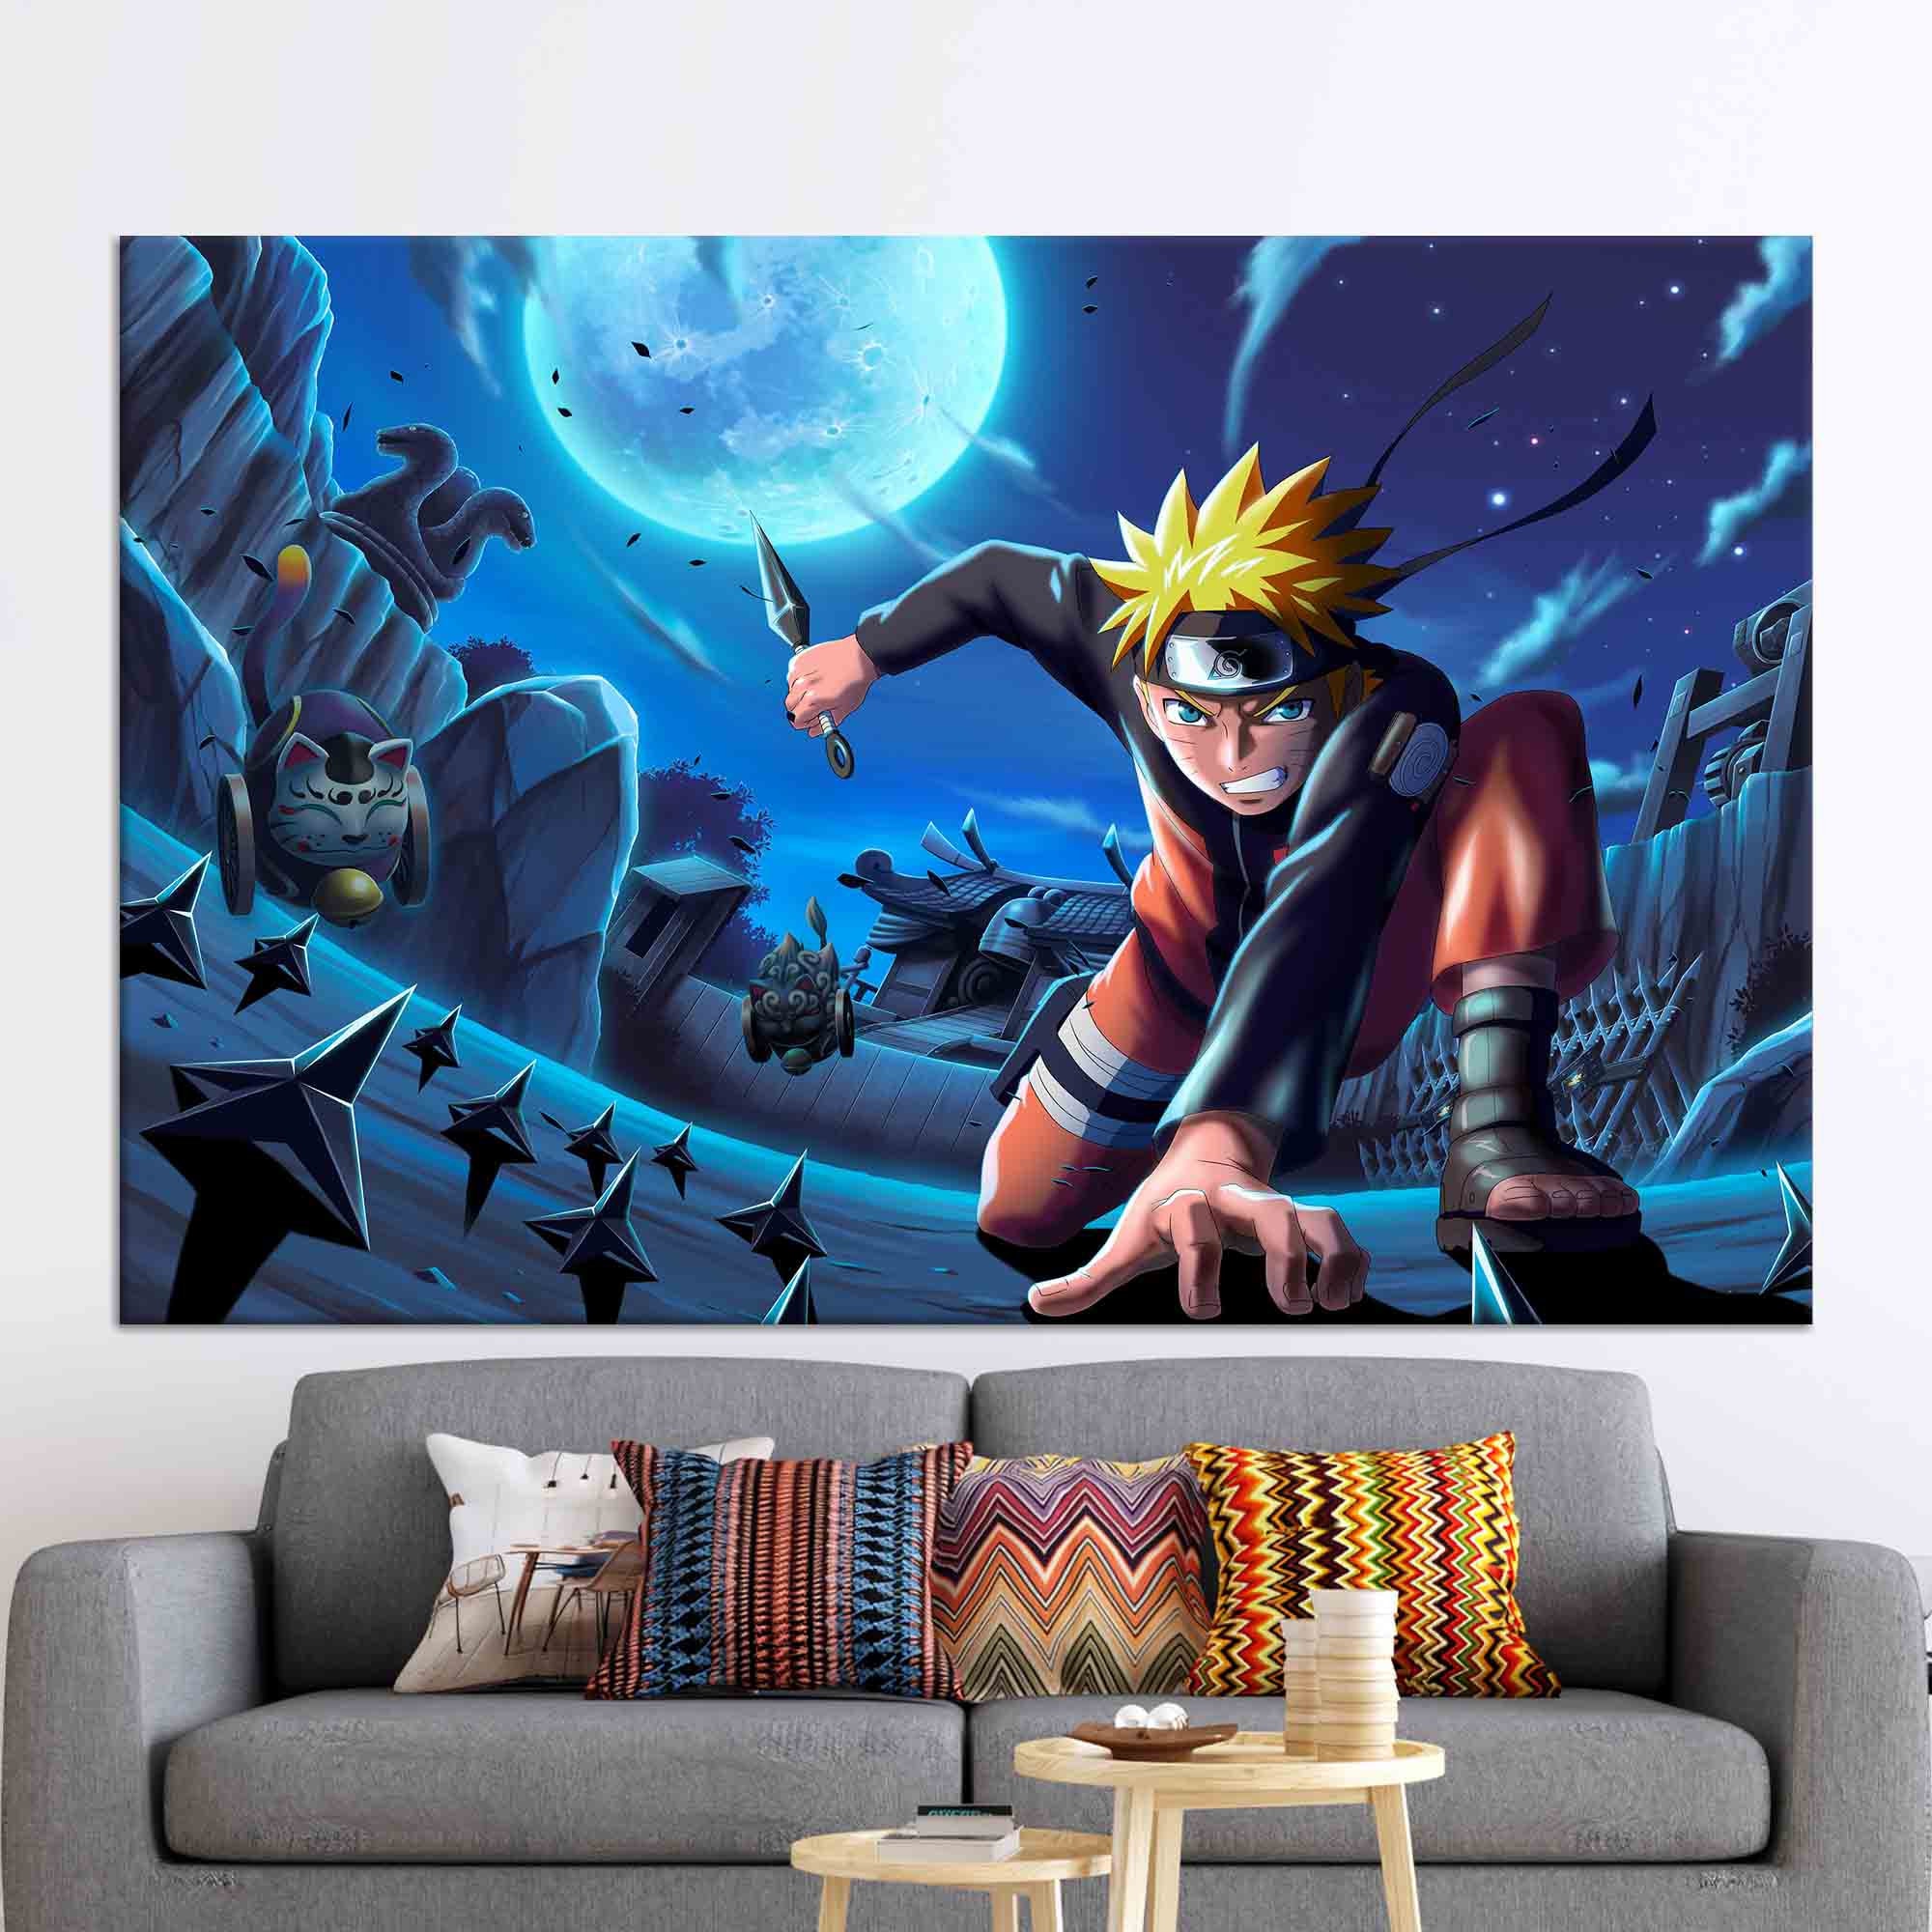 Modular Canvas Painting 5 Panel Akatsuki NARUTO Anime Wall Art Home  Decoration Modern For Boys Room Poster Frame Color  B Size   30x40x230x60x230x80x1 Buy Online at Best Price in UAE 